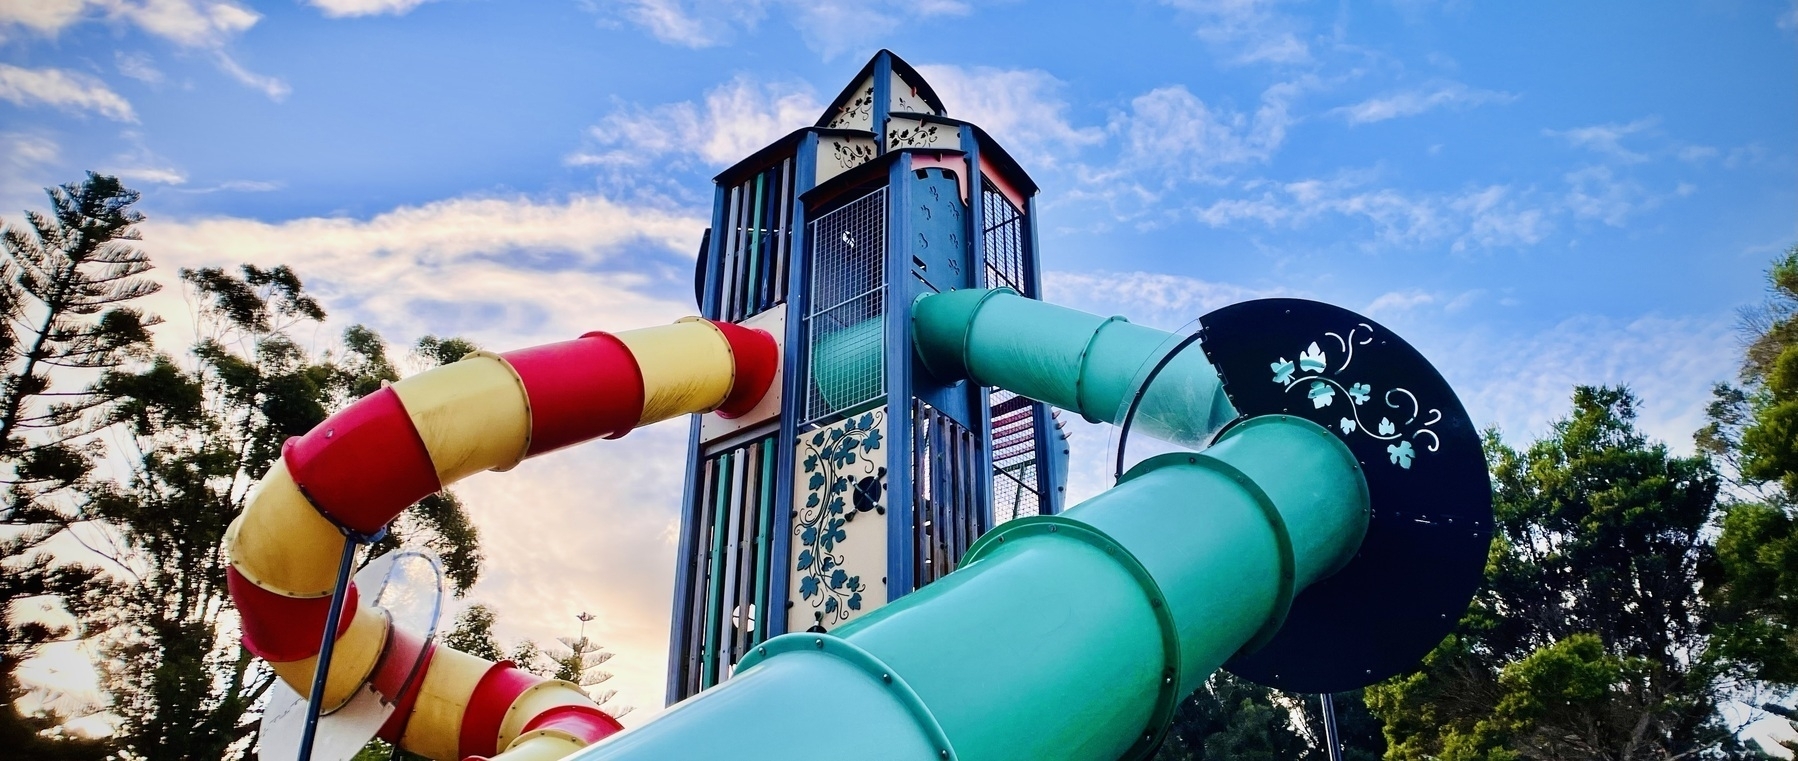 A widescreen shot of the top of a playground with winding slides